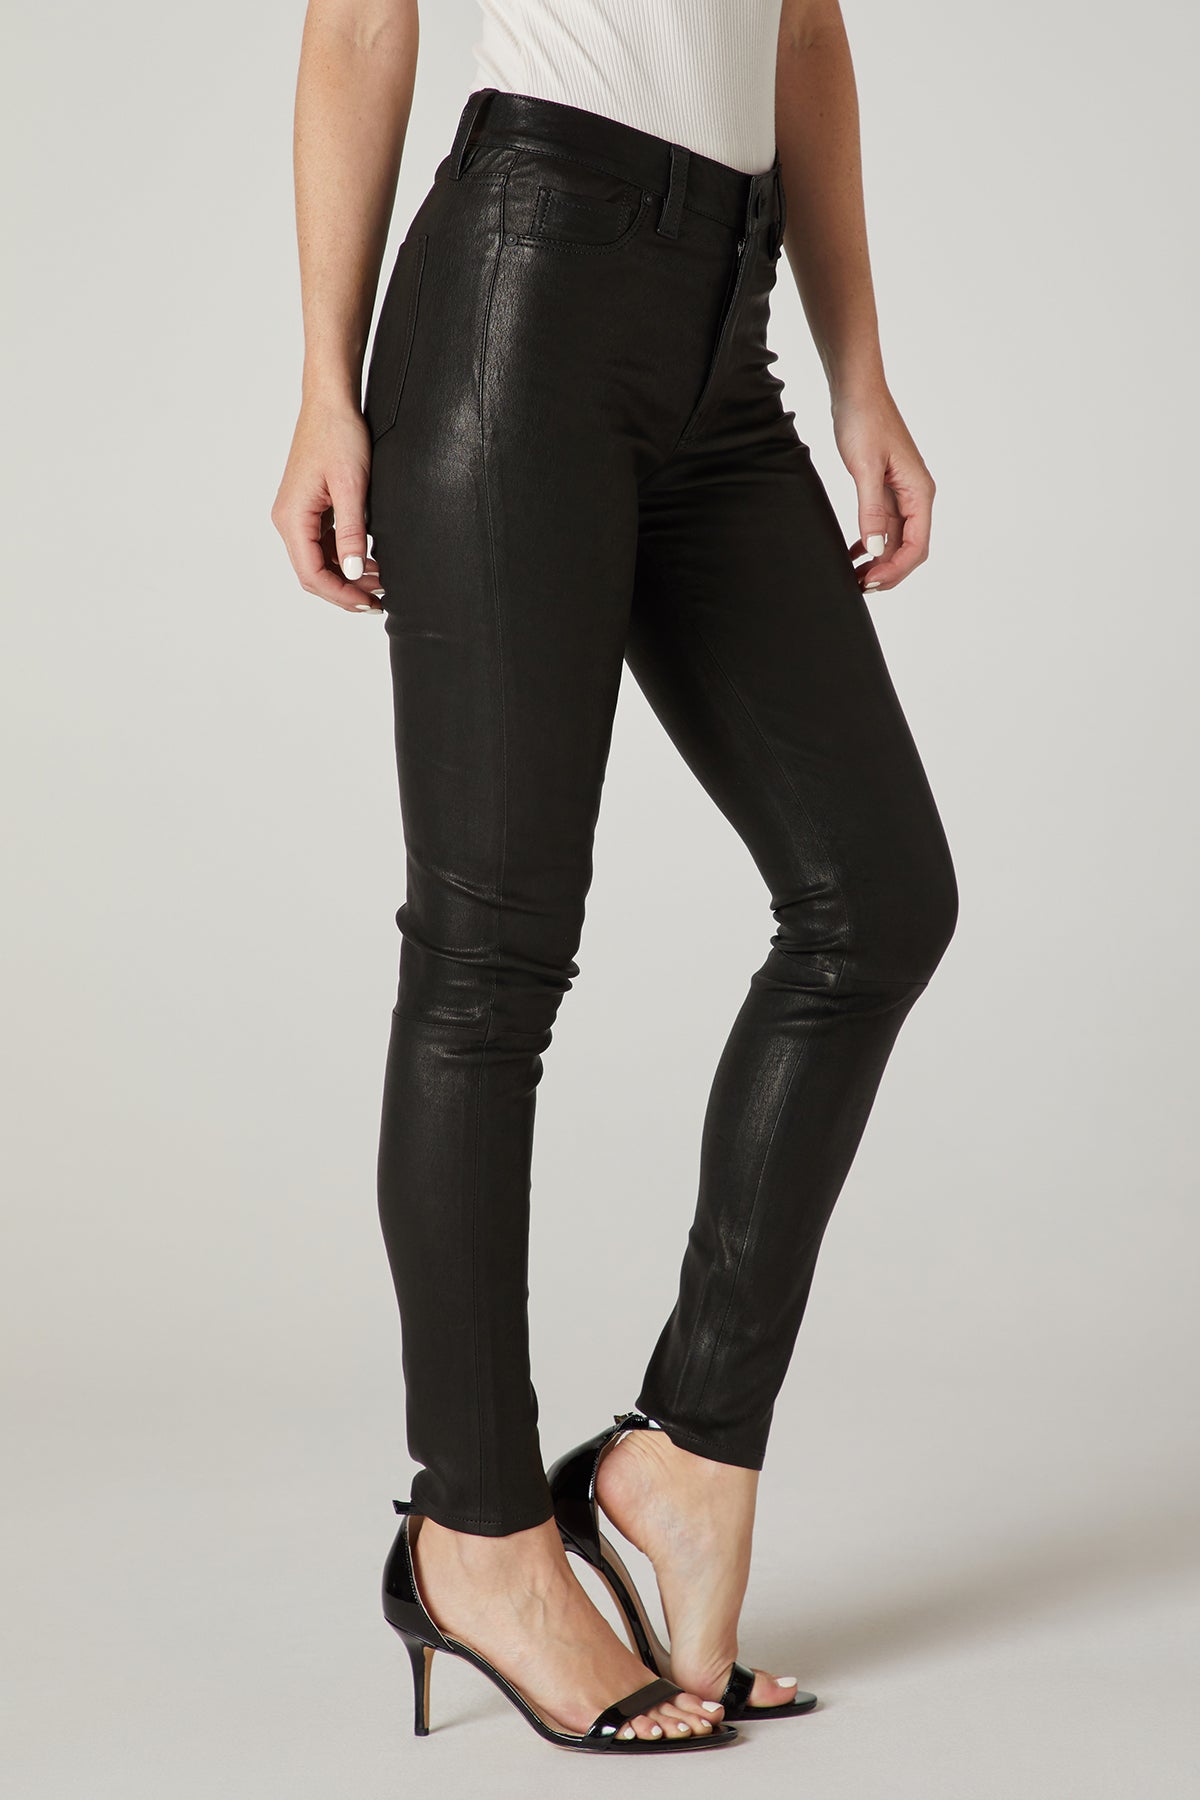 Tall Black Faux Leather High Waisted Legging  PrettyLittleThing